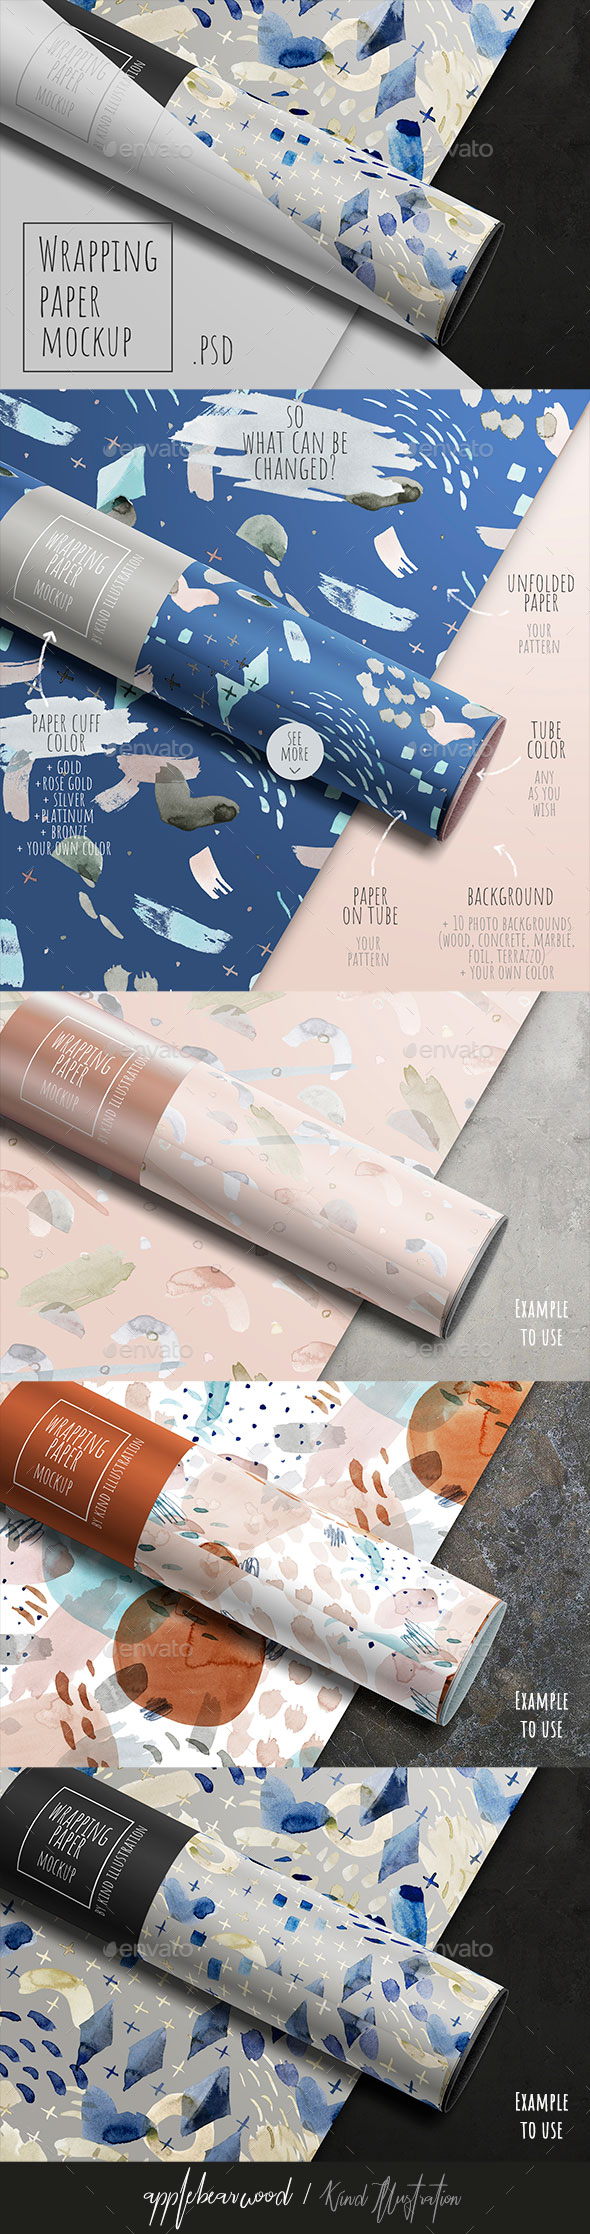 Download Wrapping Paper Mockup Graphics Designs Templates PSD Mockup Templates